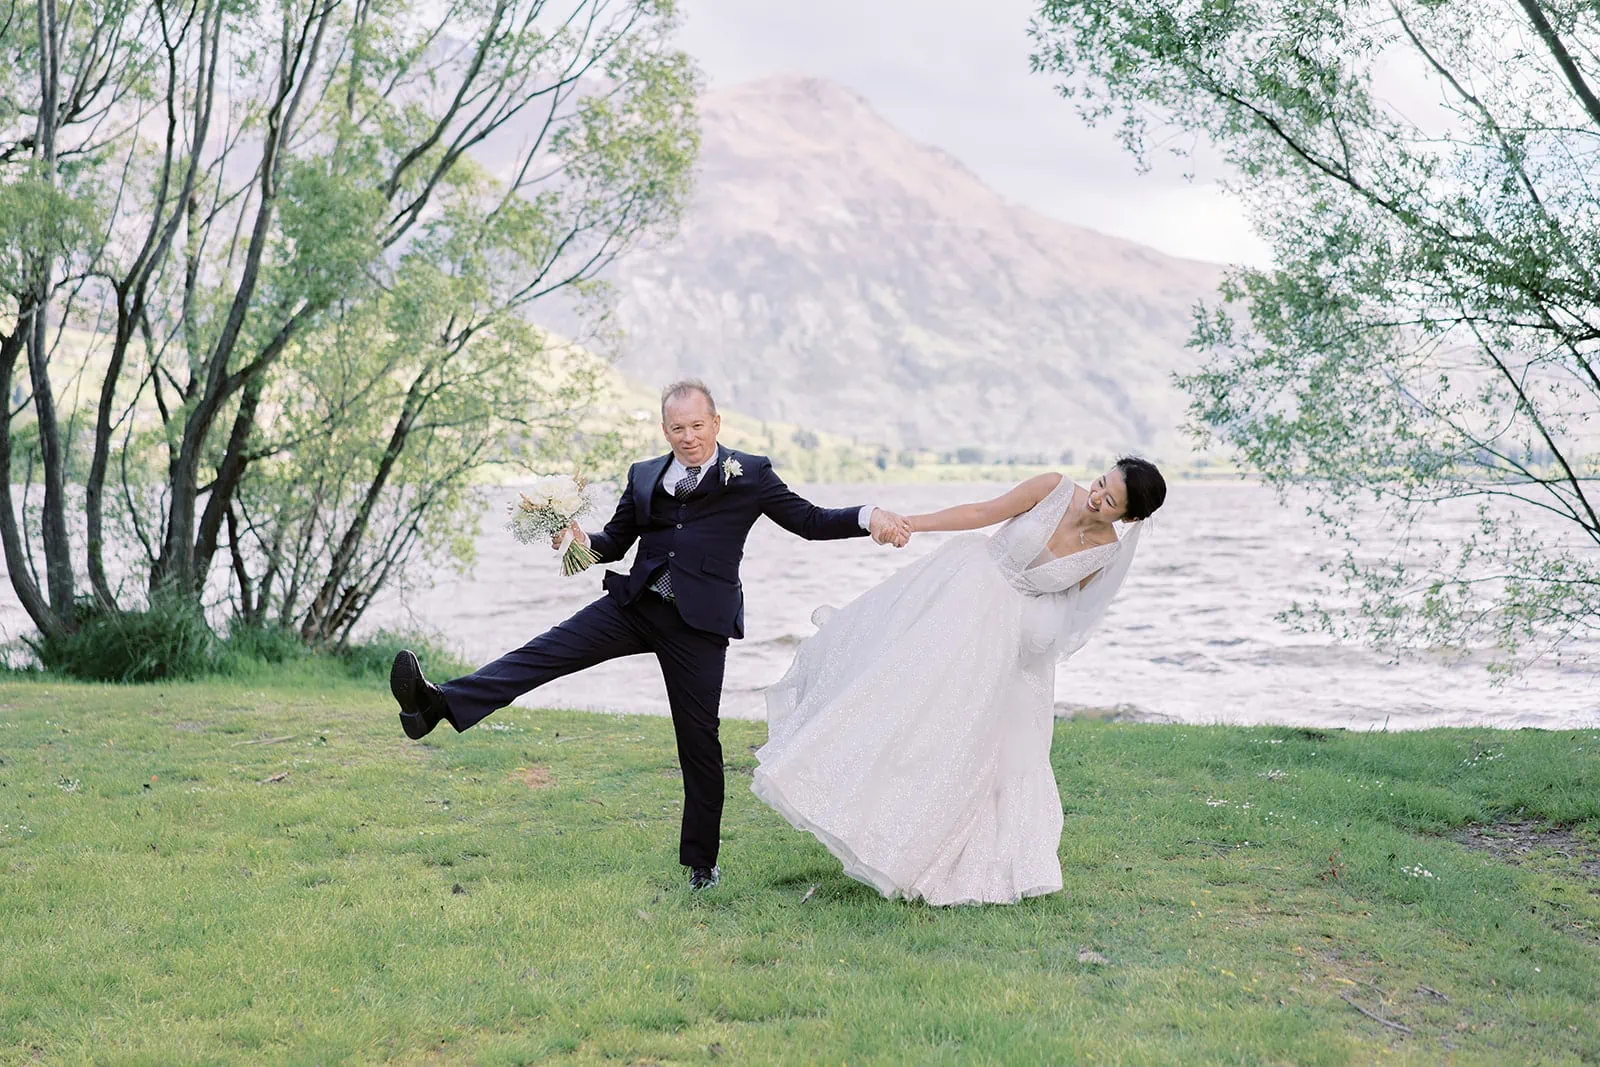 Queenstown Elopement Heli Wedding Photographer クイーンズタウン結婚式 | A bride and groom named Joel and Meng joyfully jump in the grass near Stoneridge Estate, a picturesque lake setting.